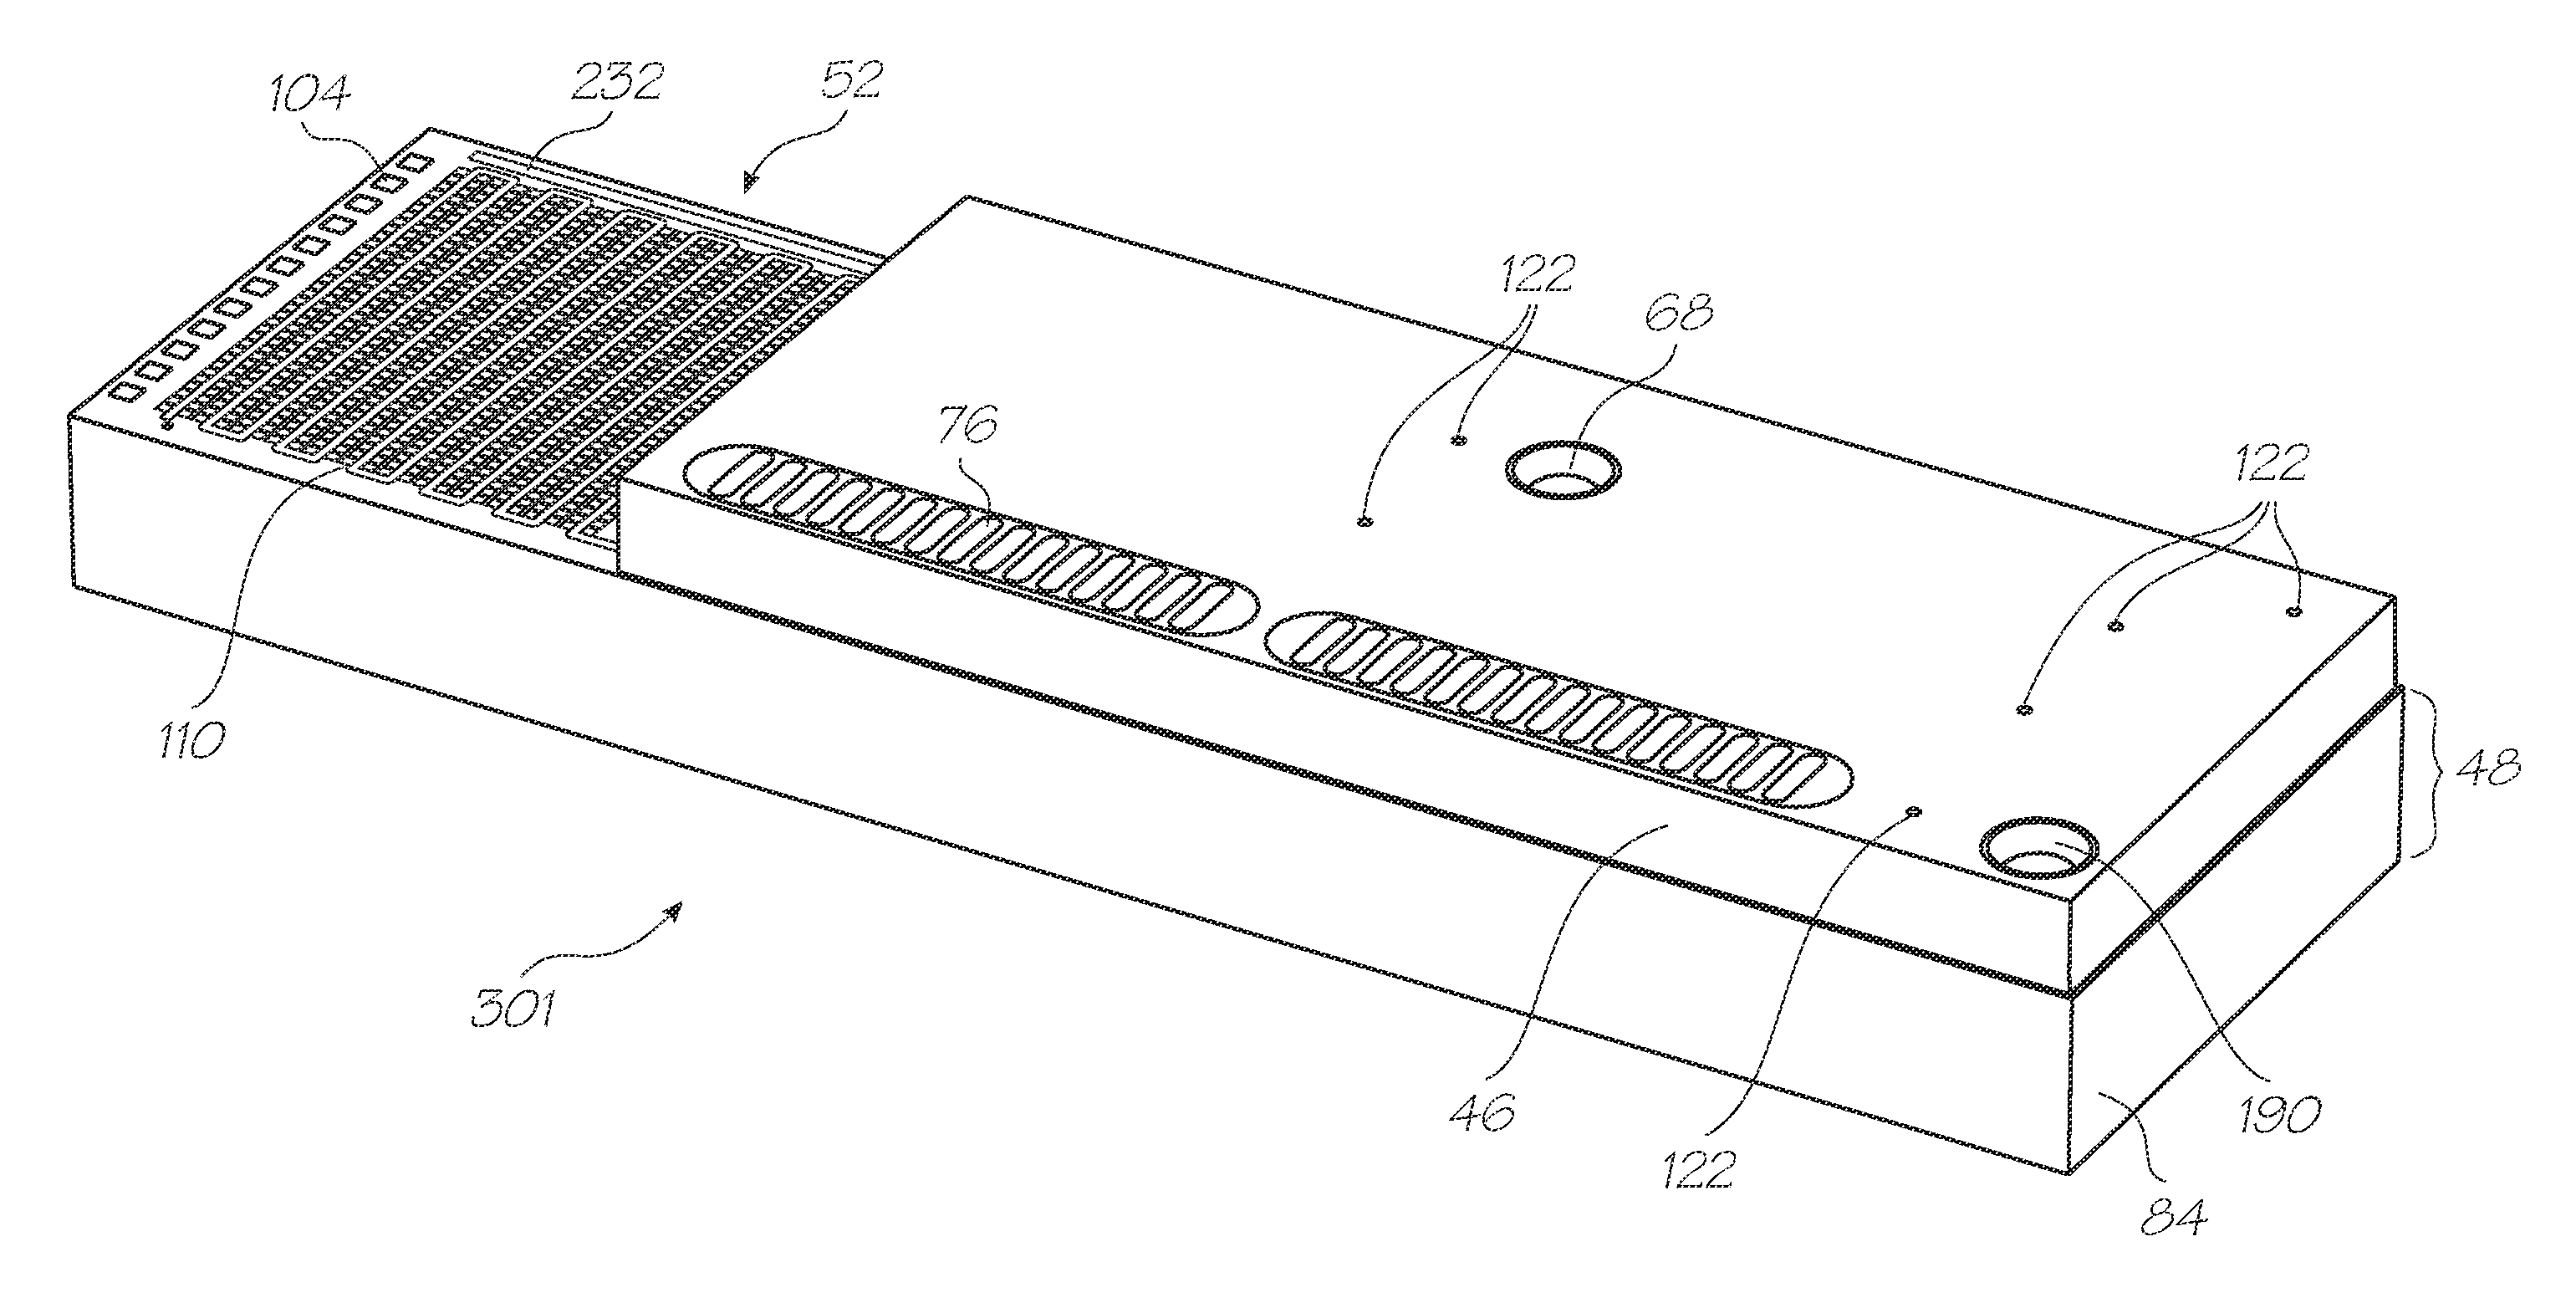 Test module with microfluidic device having loc and dialysis device for separating pathogens from other constituents in a biological sample